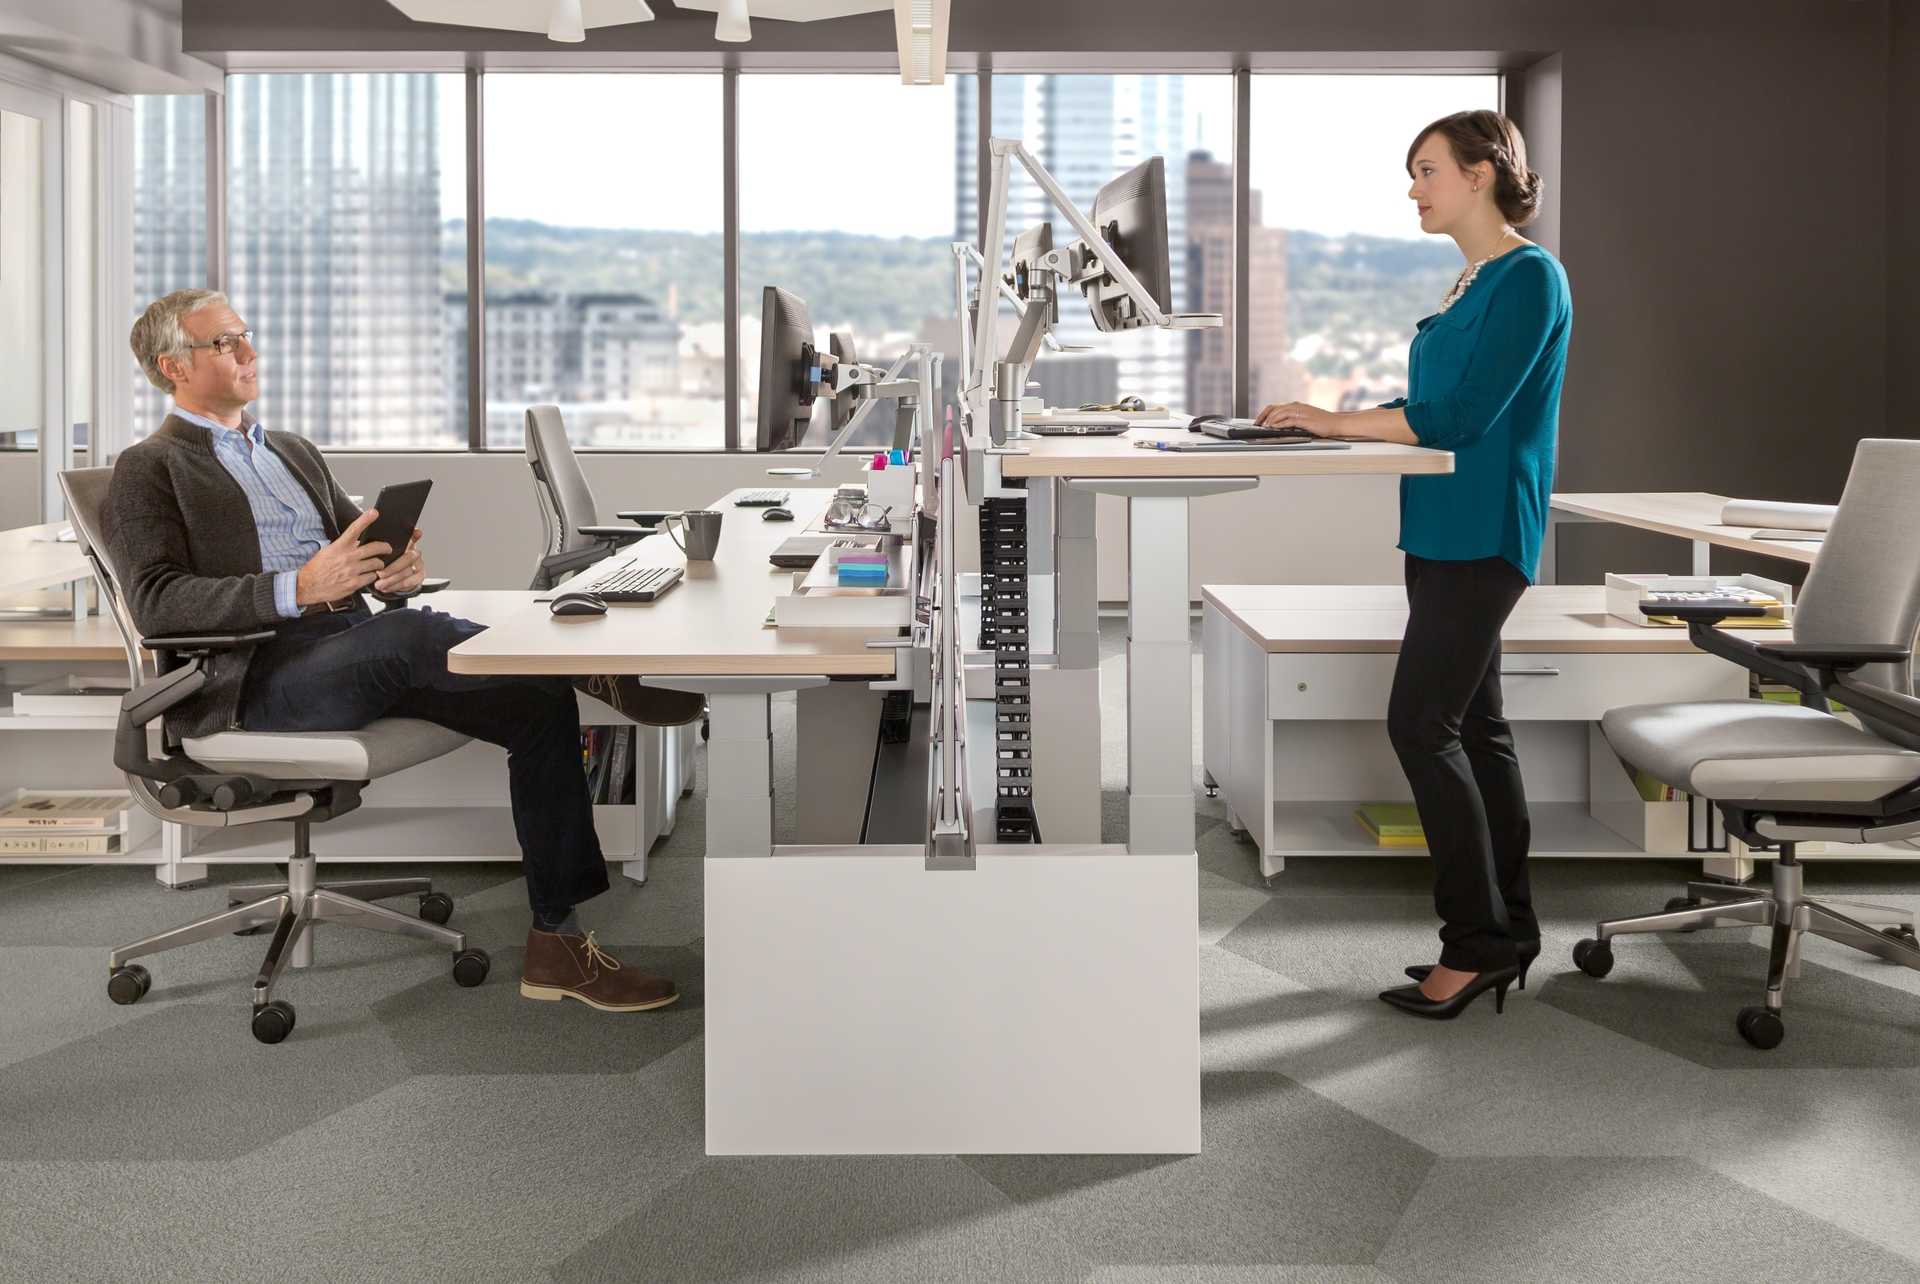 Working At Standing Desks Can Help Us Live Longer Shows New Study